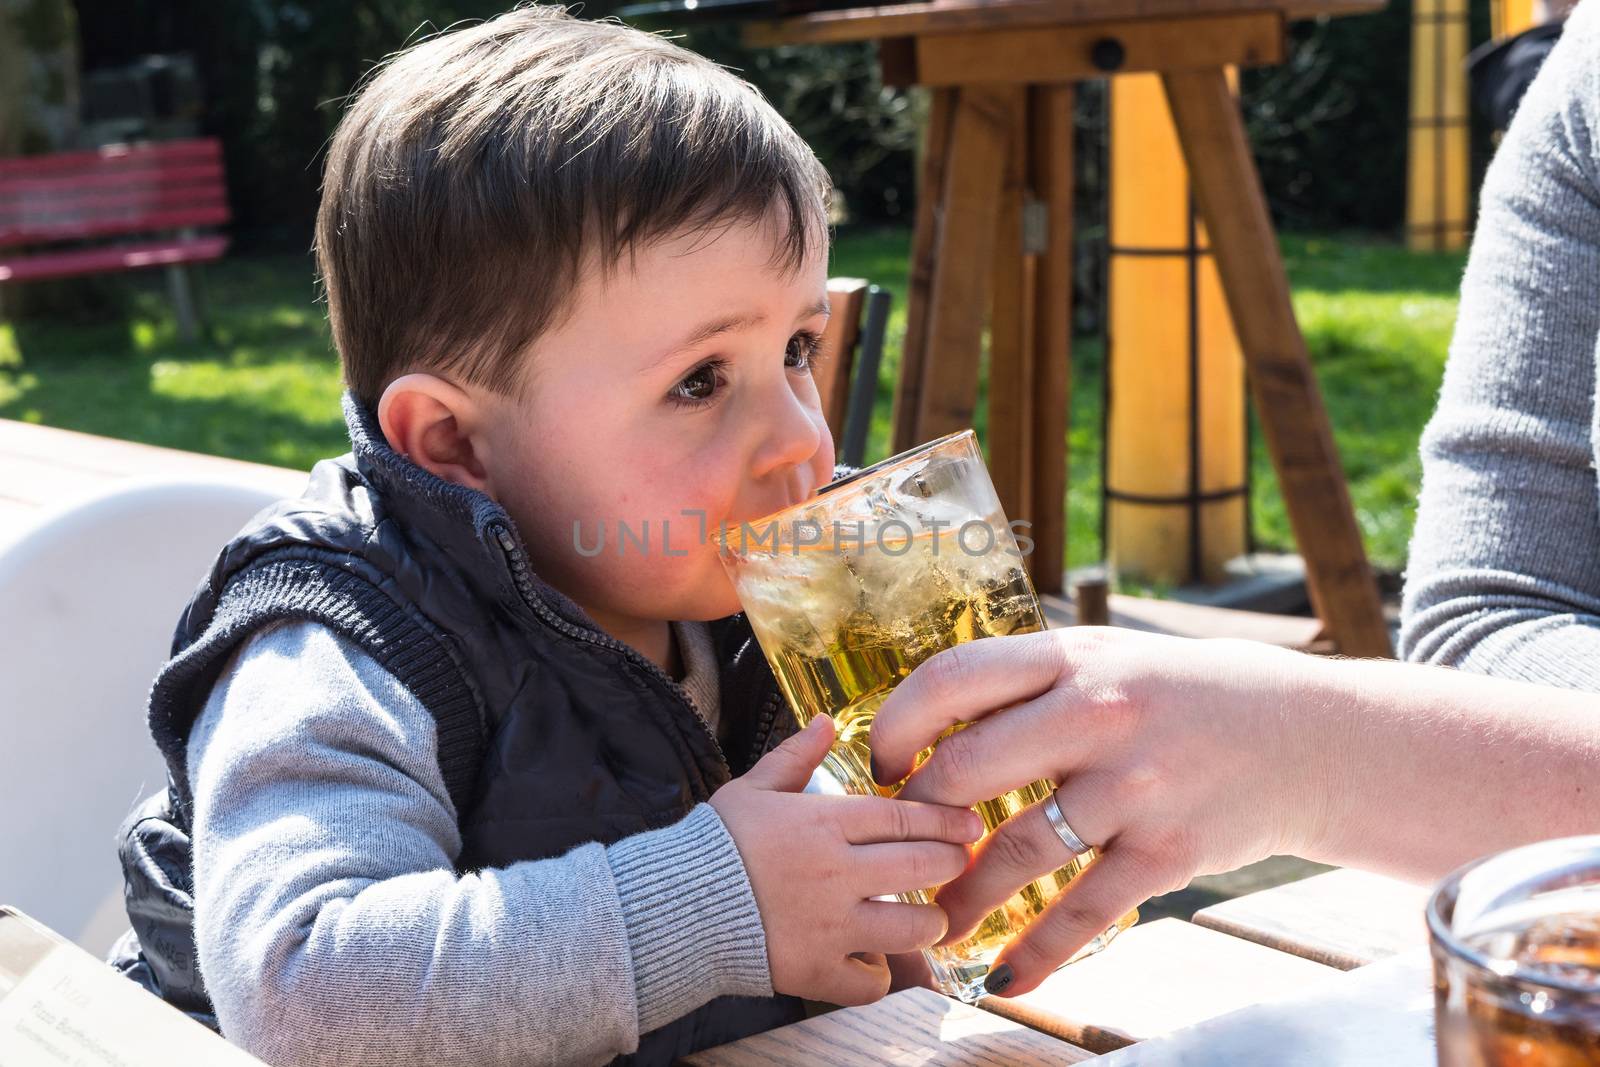 Child drinks juice from a glass in a garden restaurant.